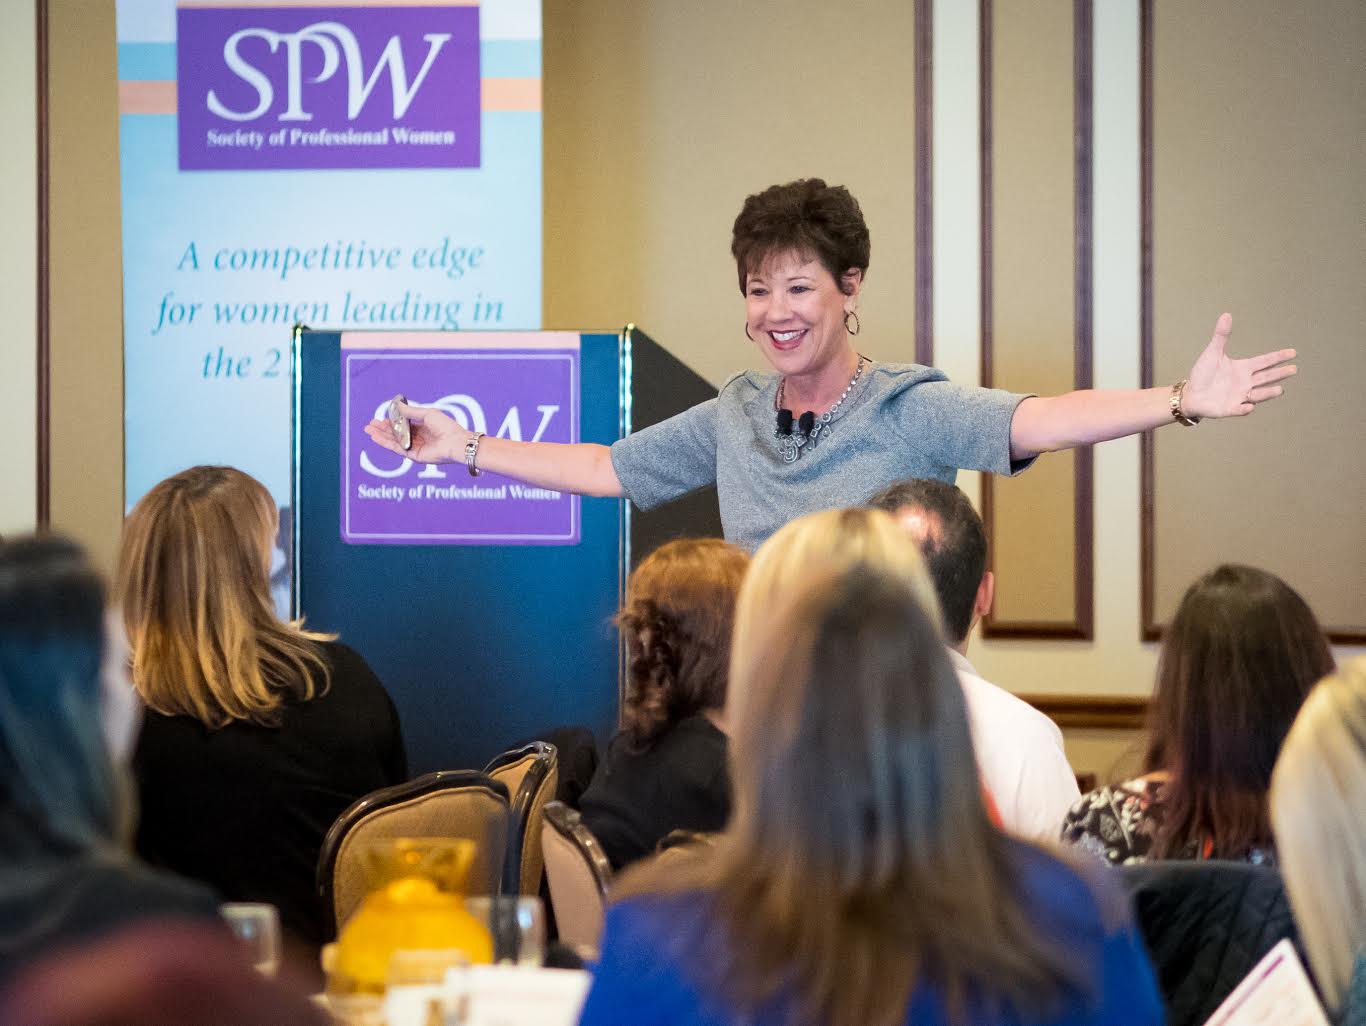 Karen at the Society of Professional Women